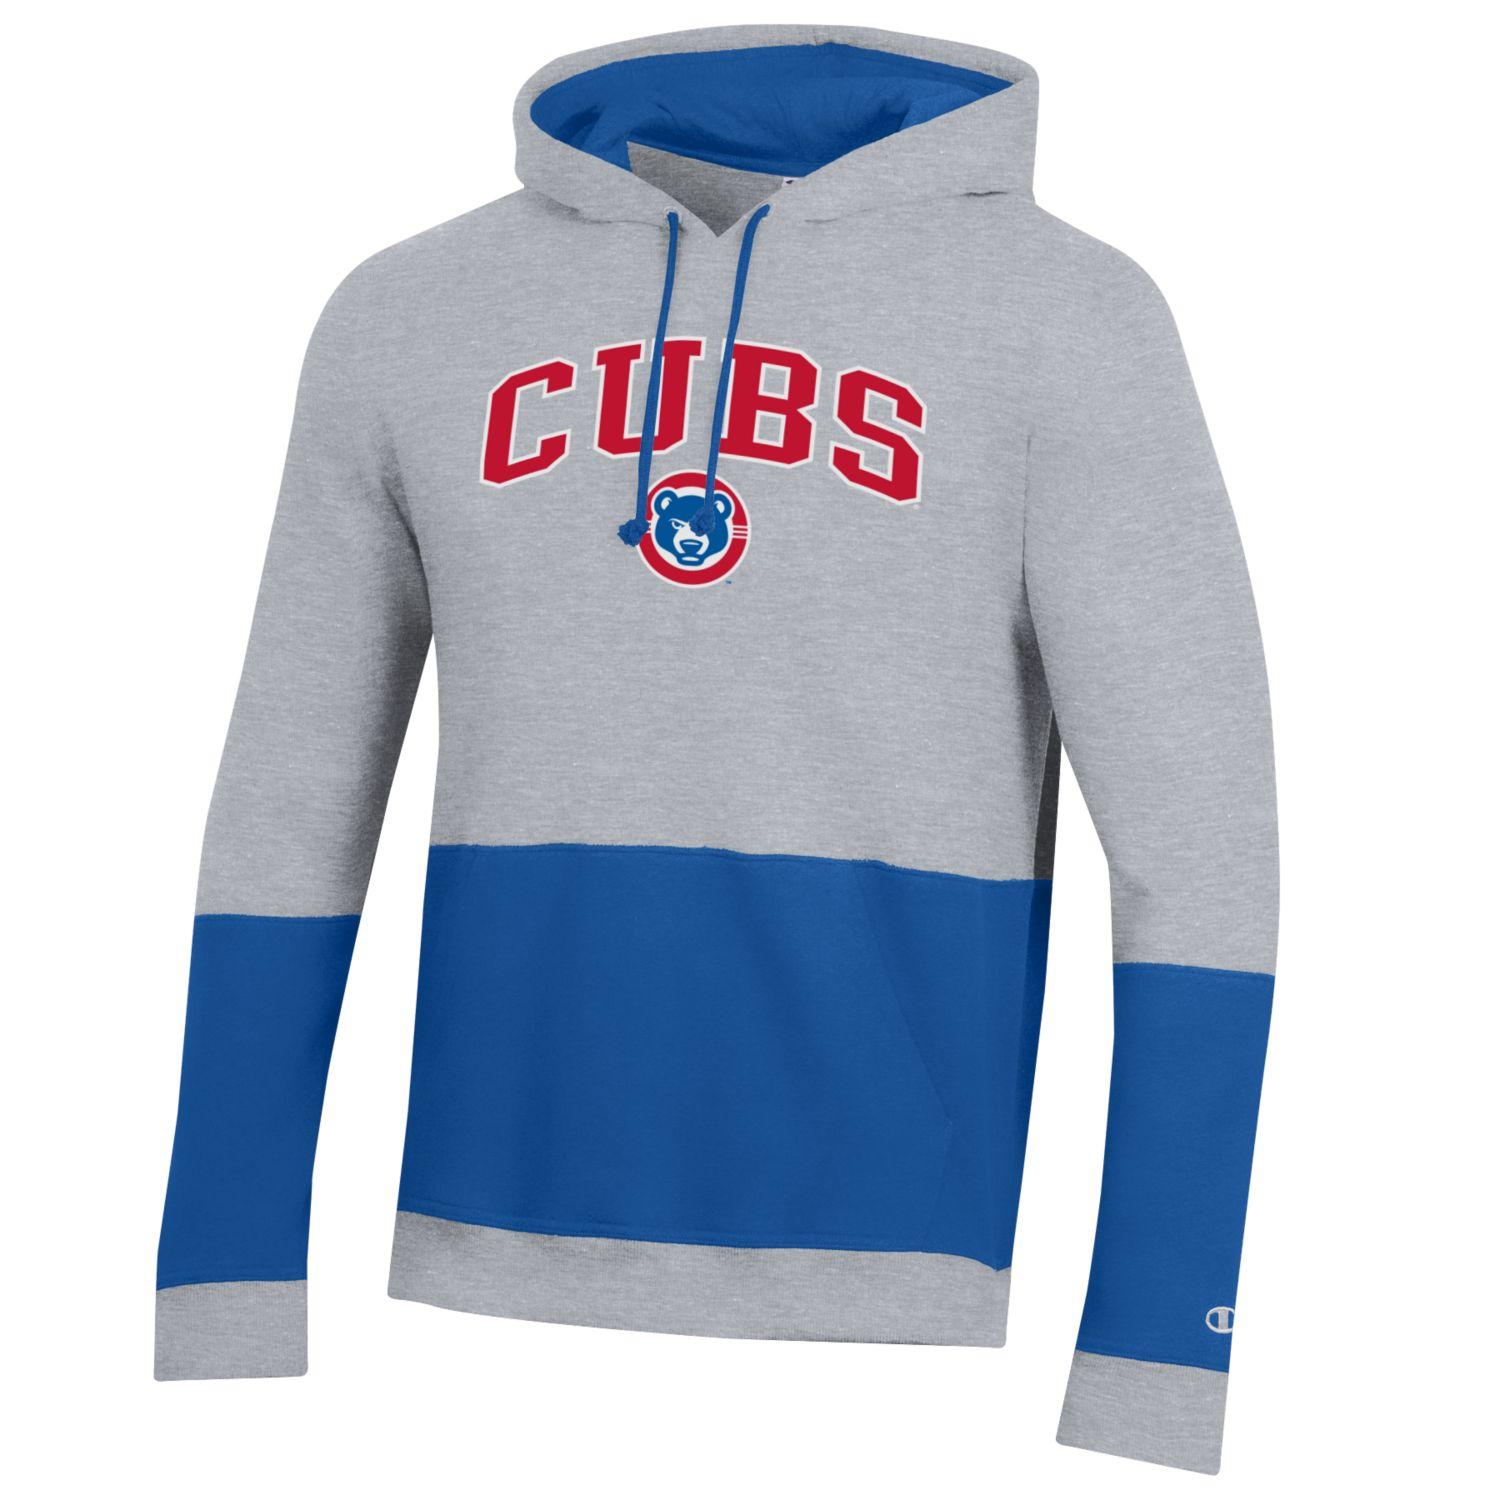 Cubs - The Brand